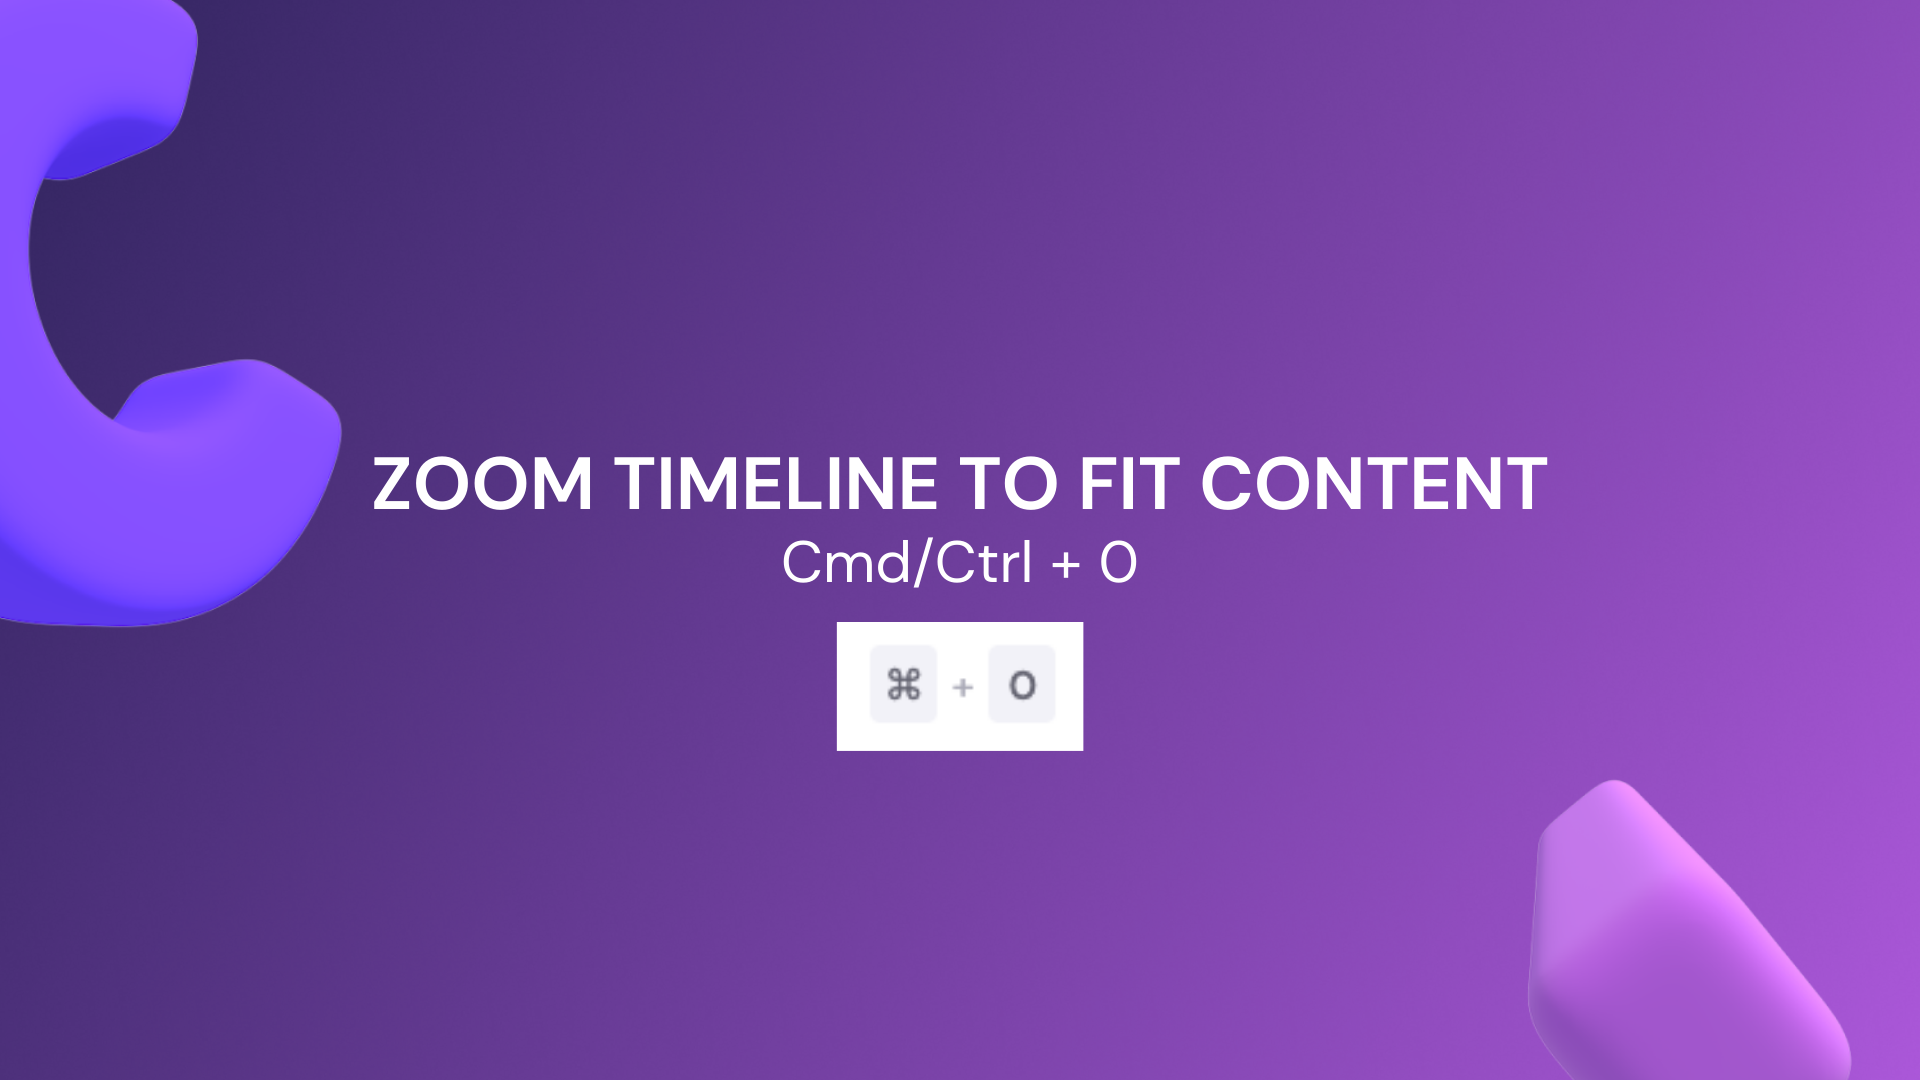 Zoom timeline to fit content